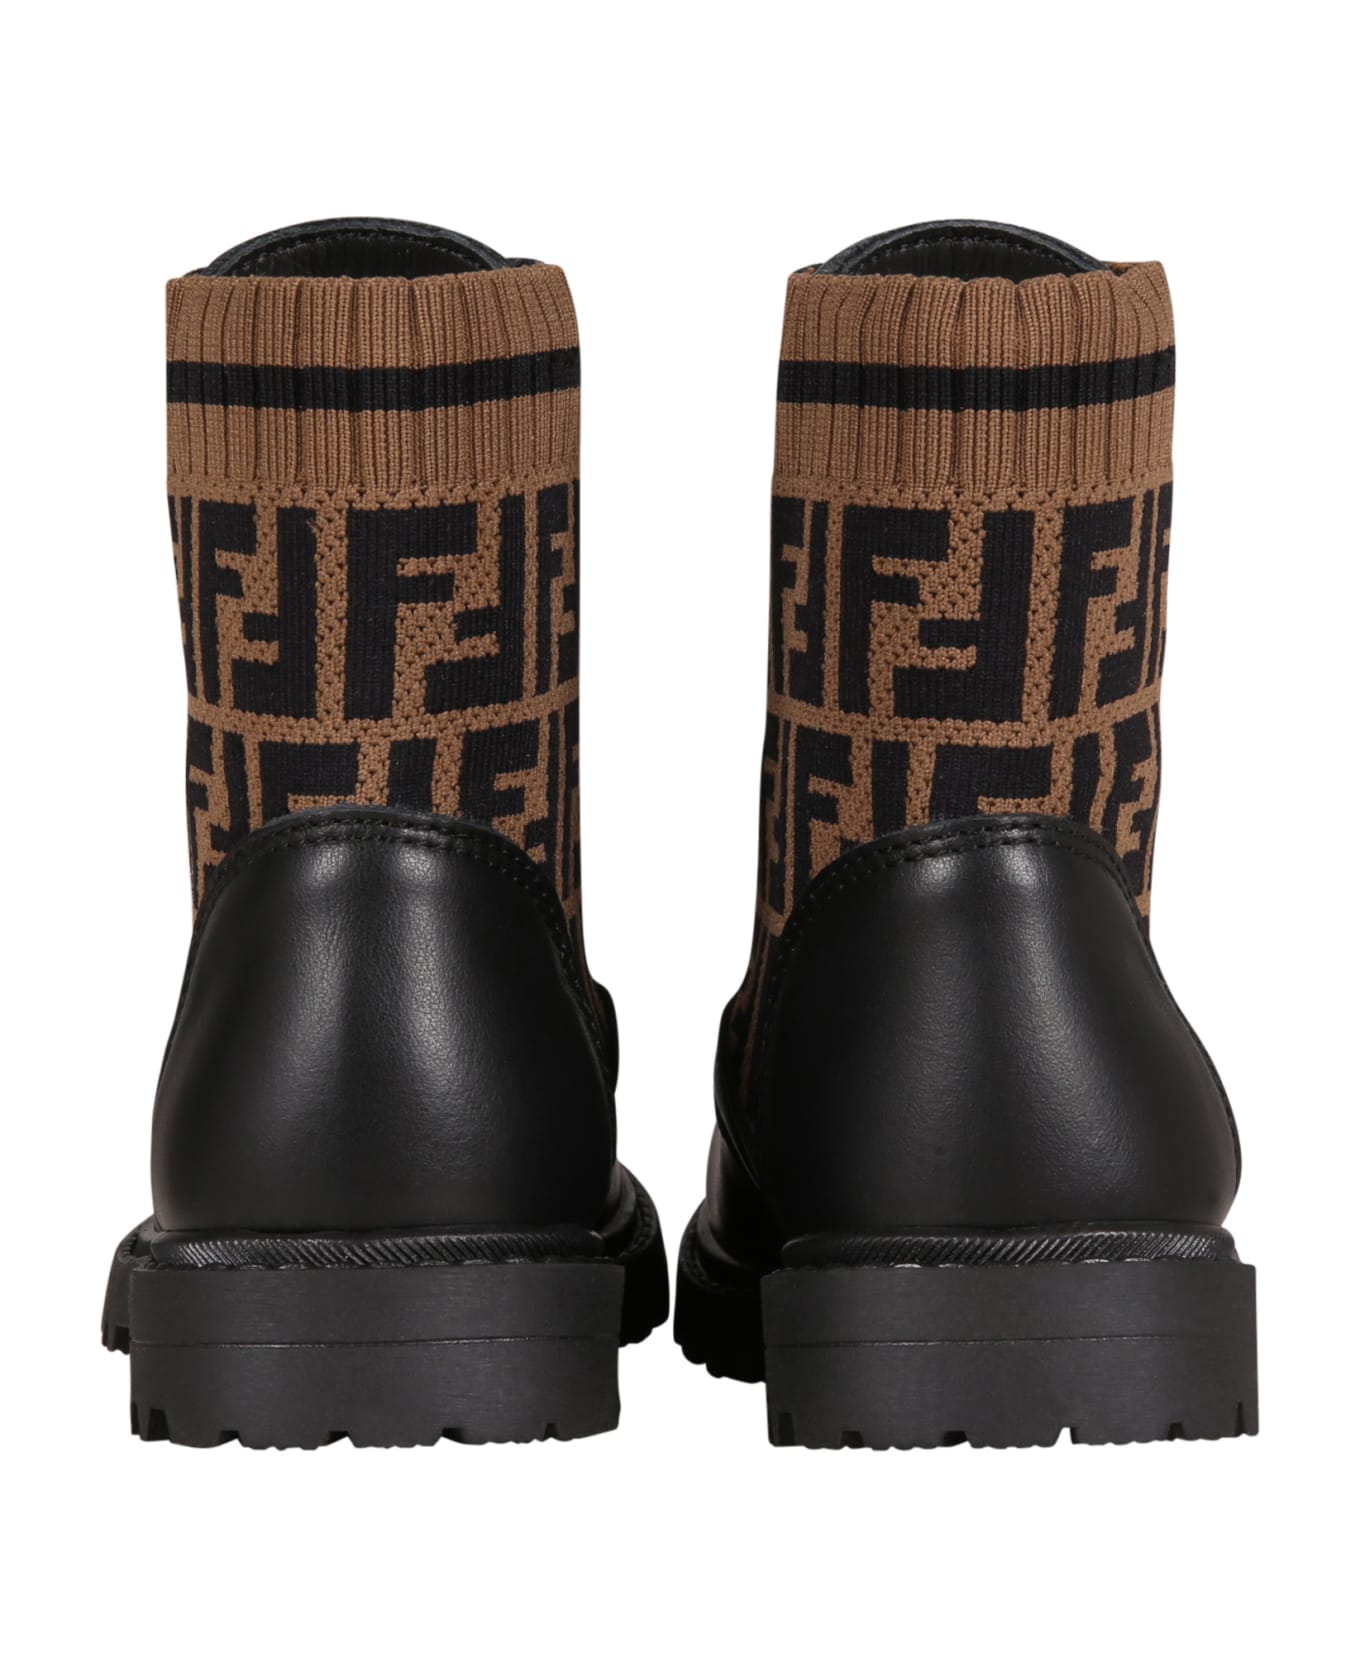 Fendi Black Boots For Kids With Double Ff - Pmm Nero Tabacco Nero